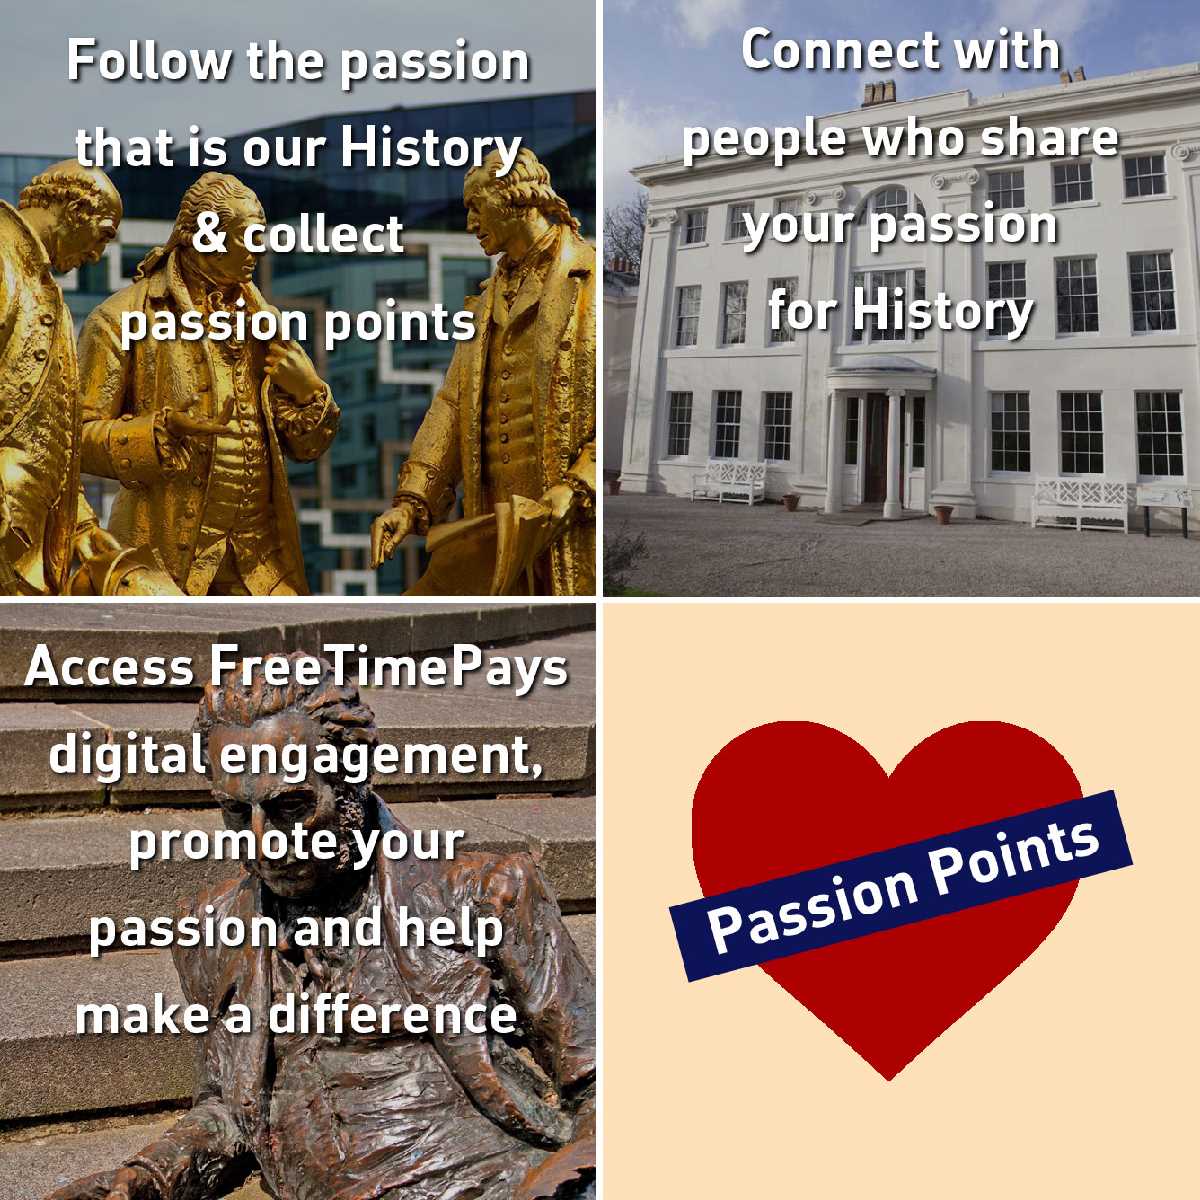 Are you passionate about History & Heritage? Join Us!